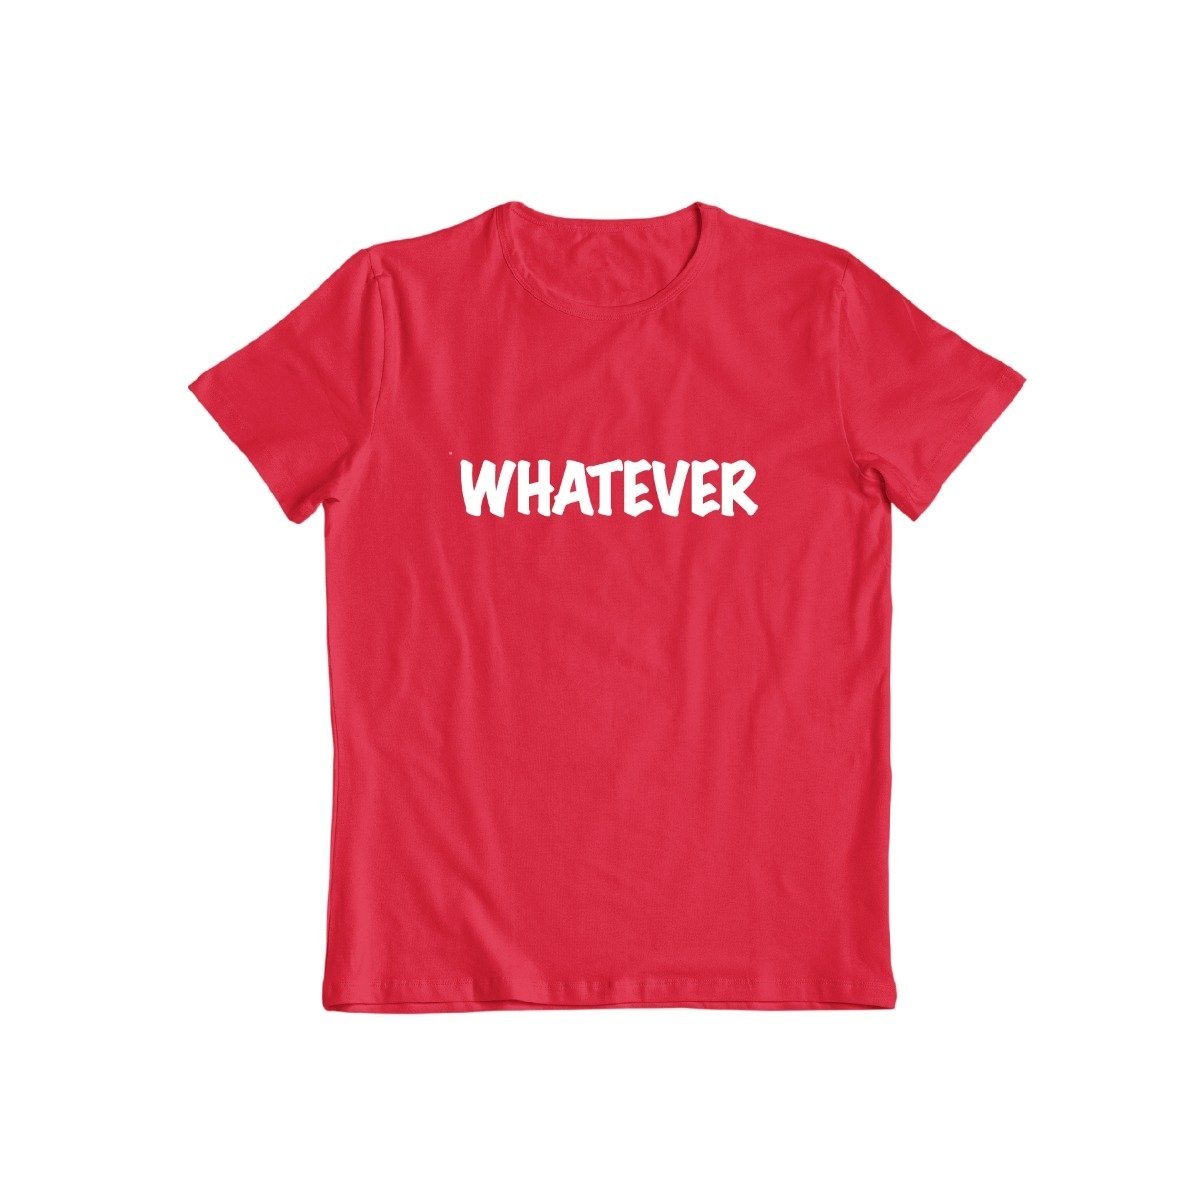 Whatever T-Shirt for Men and Women / Red / 3XL